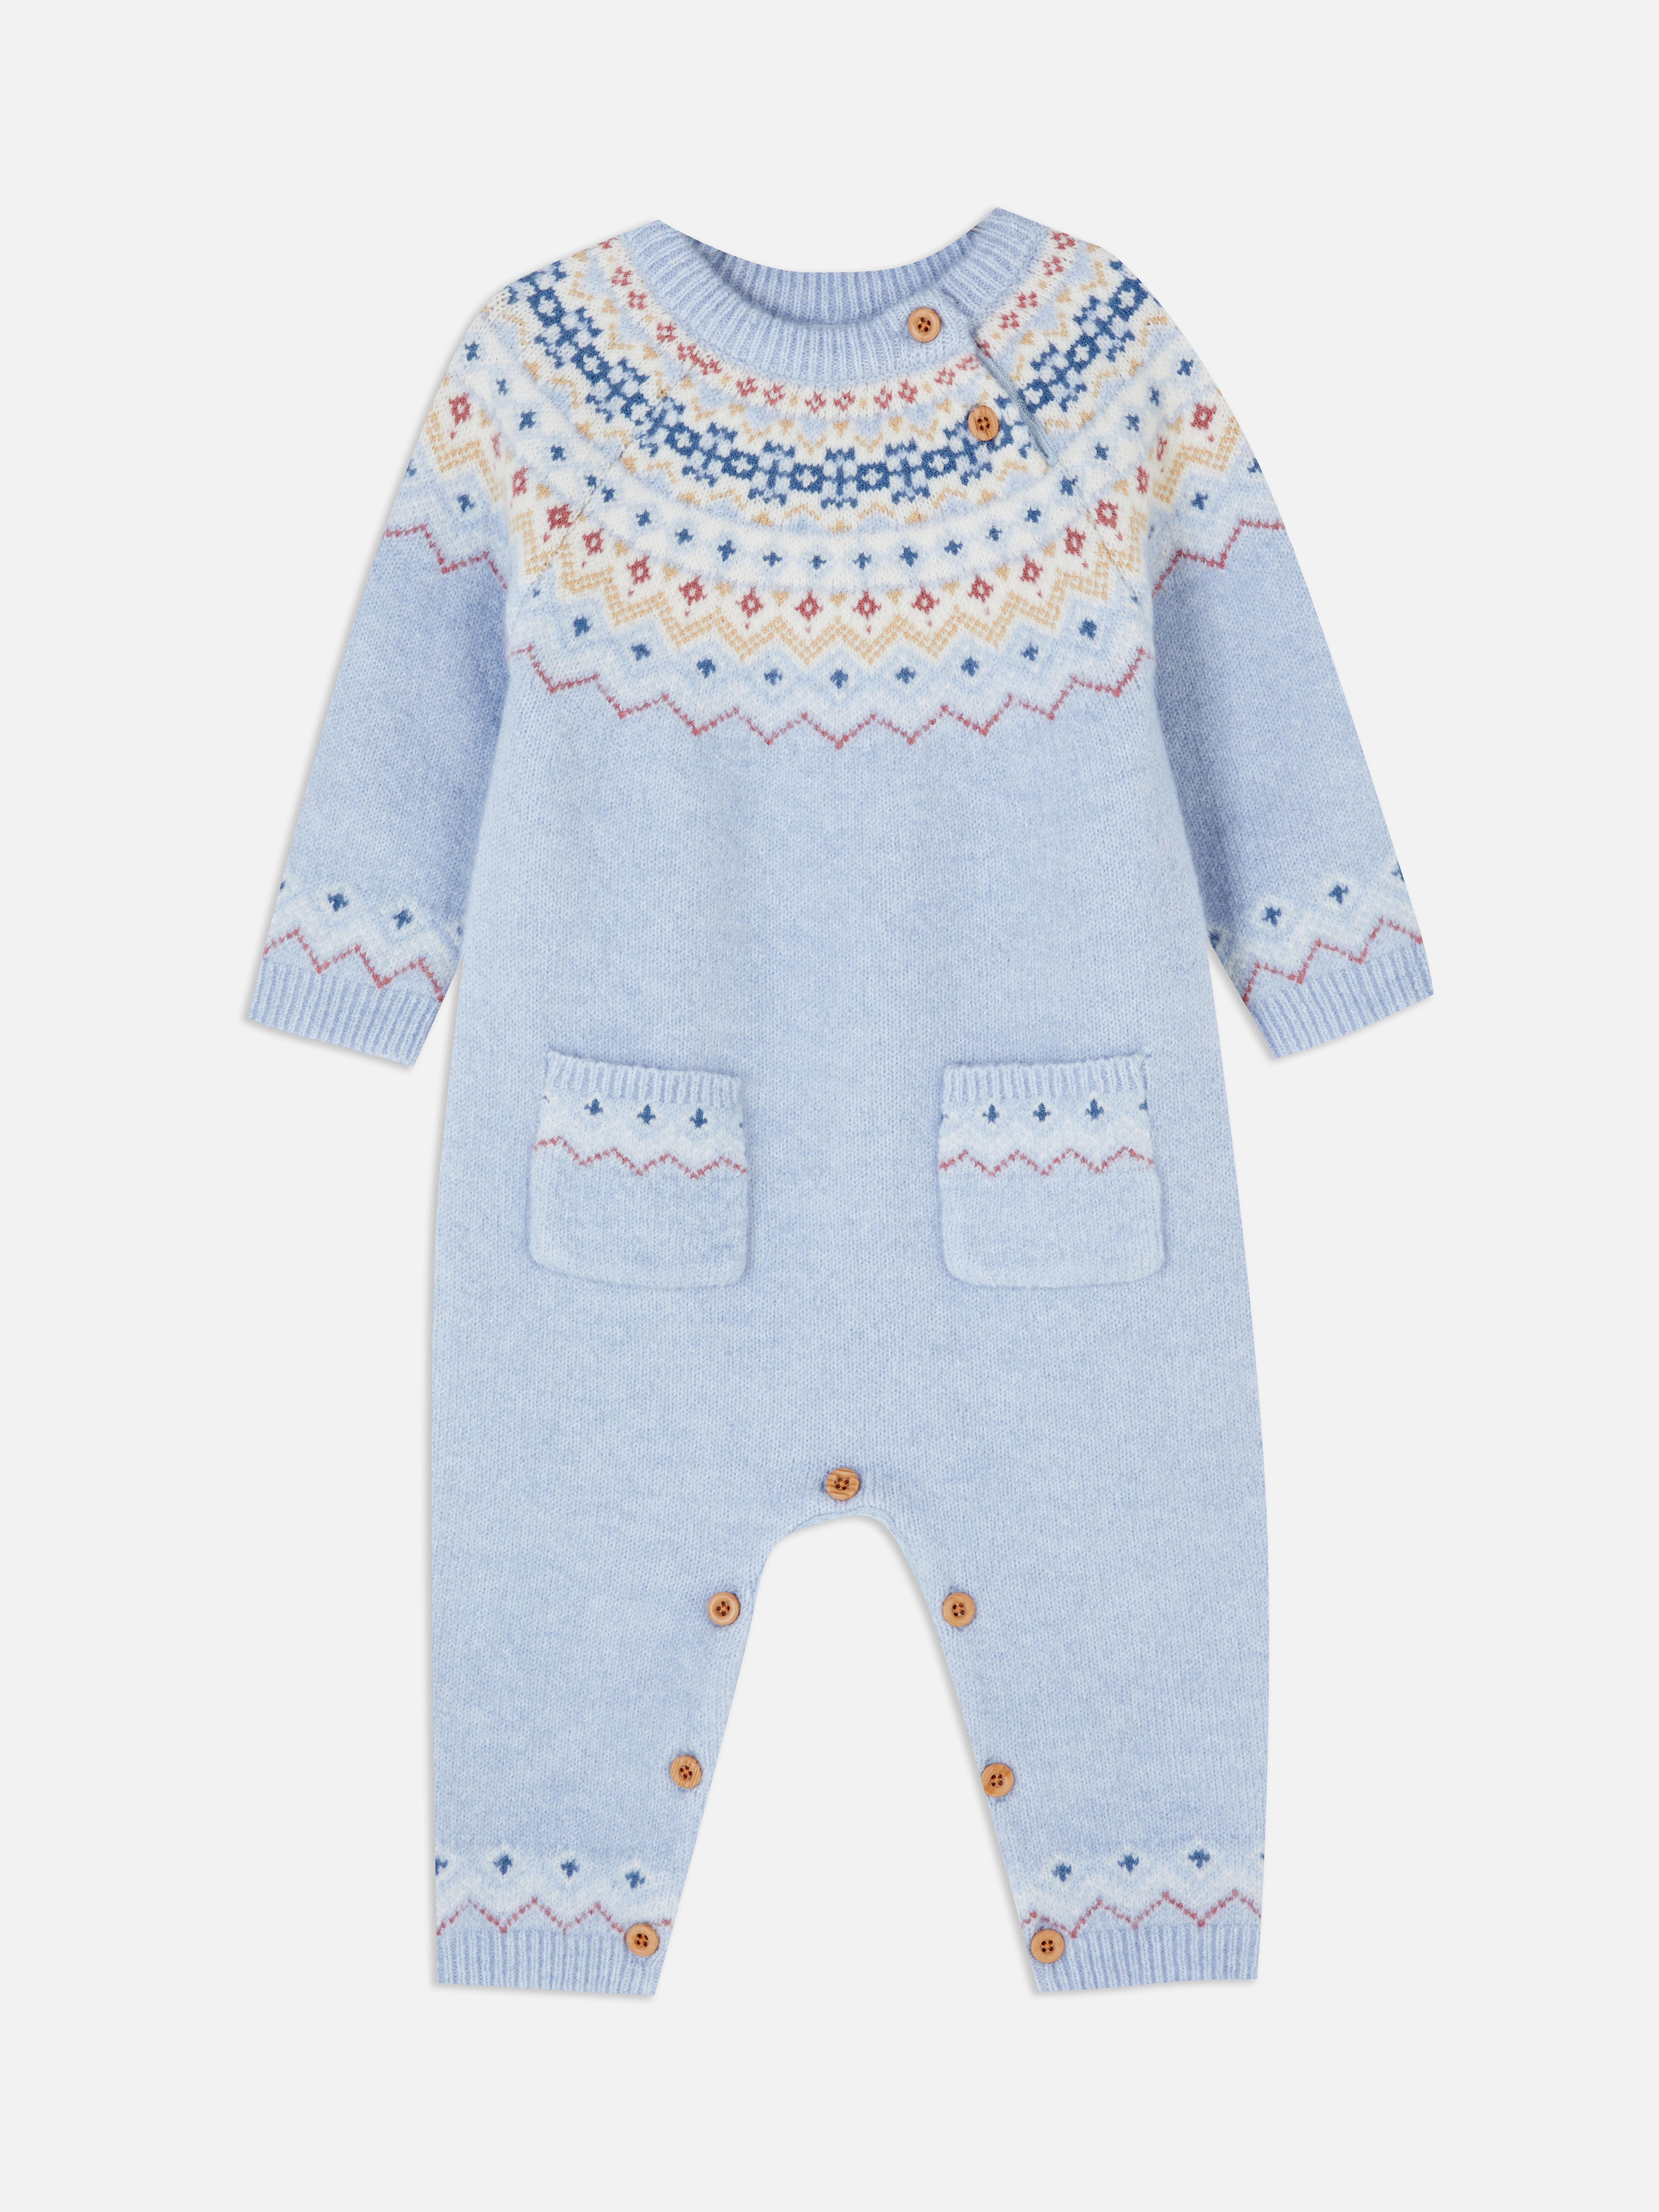 Stacey Solomon Fair Isle Knitted Jumpsuit Blue